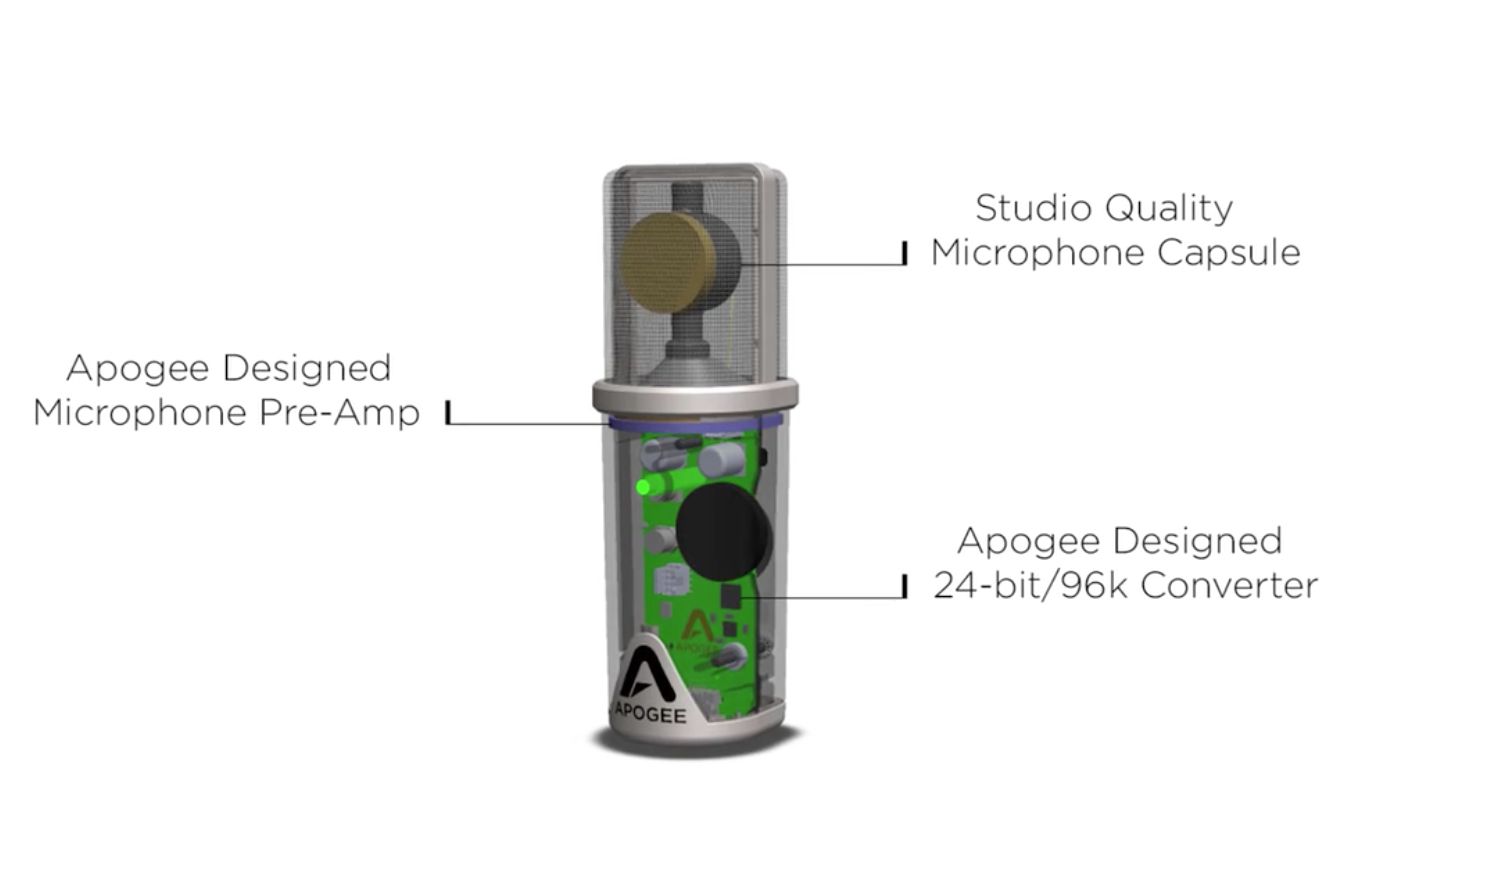 Apogee crams some top-quality components into the compact casing.